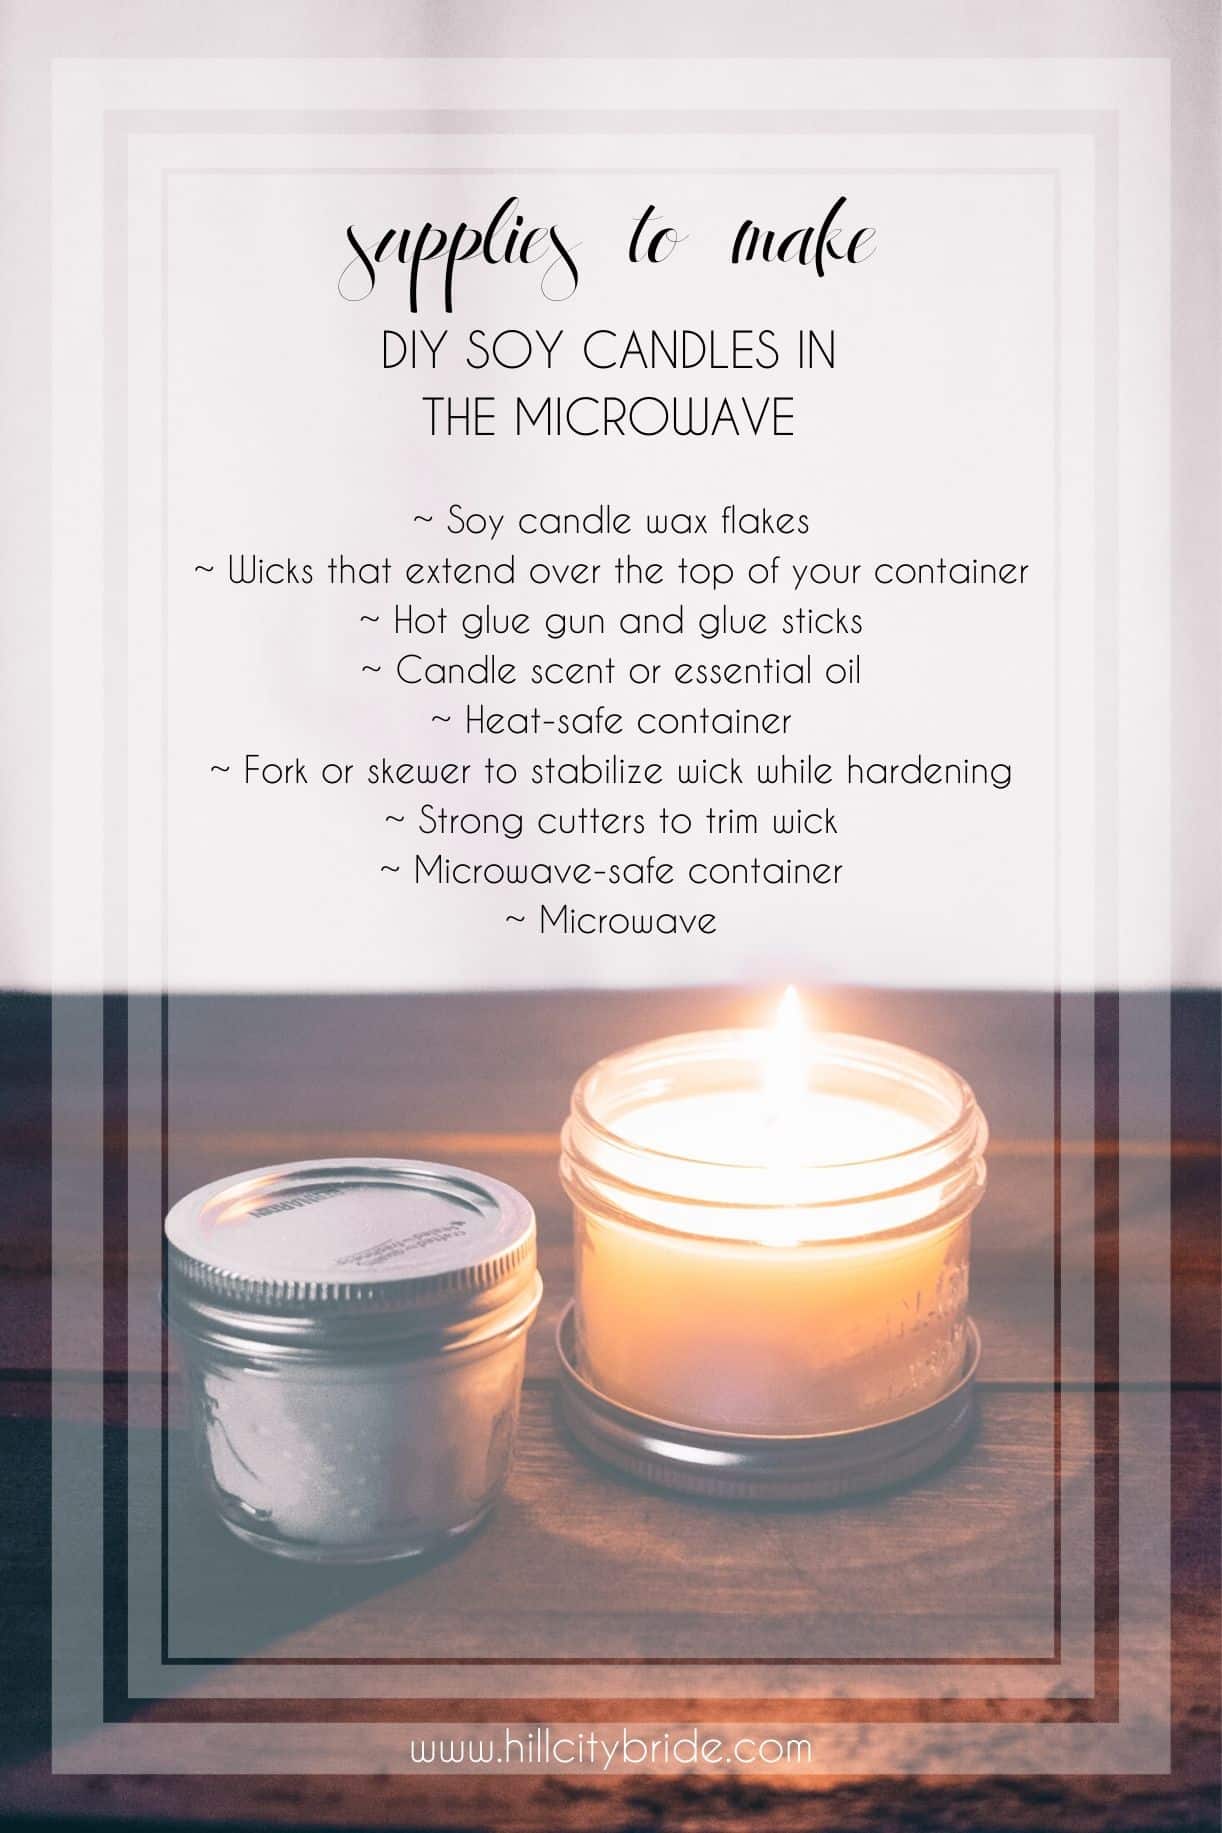 DIY Soy Candle Supplies | Hill City Bride | How to Make DIY Soy Candles Instructions